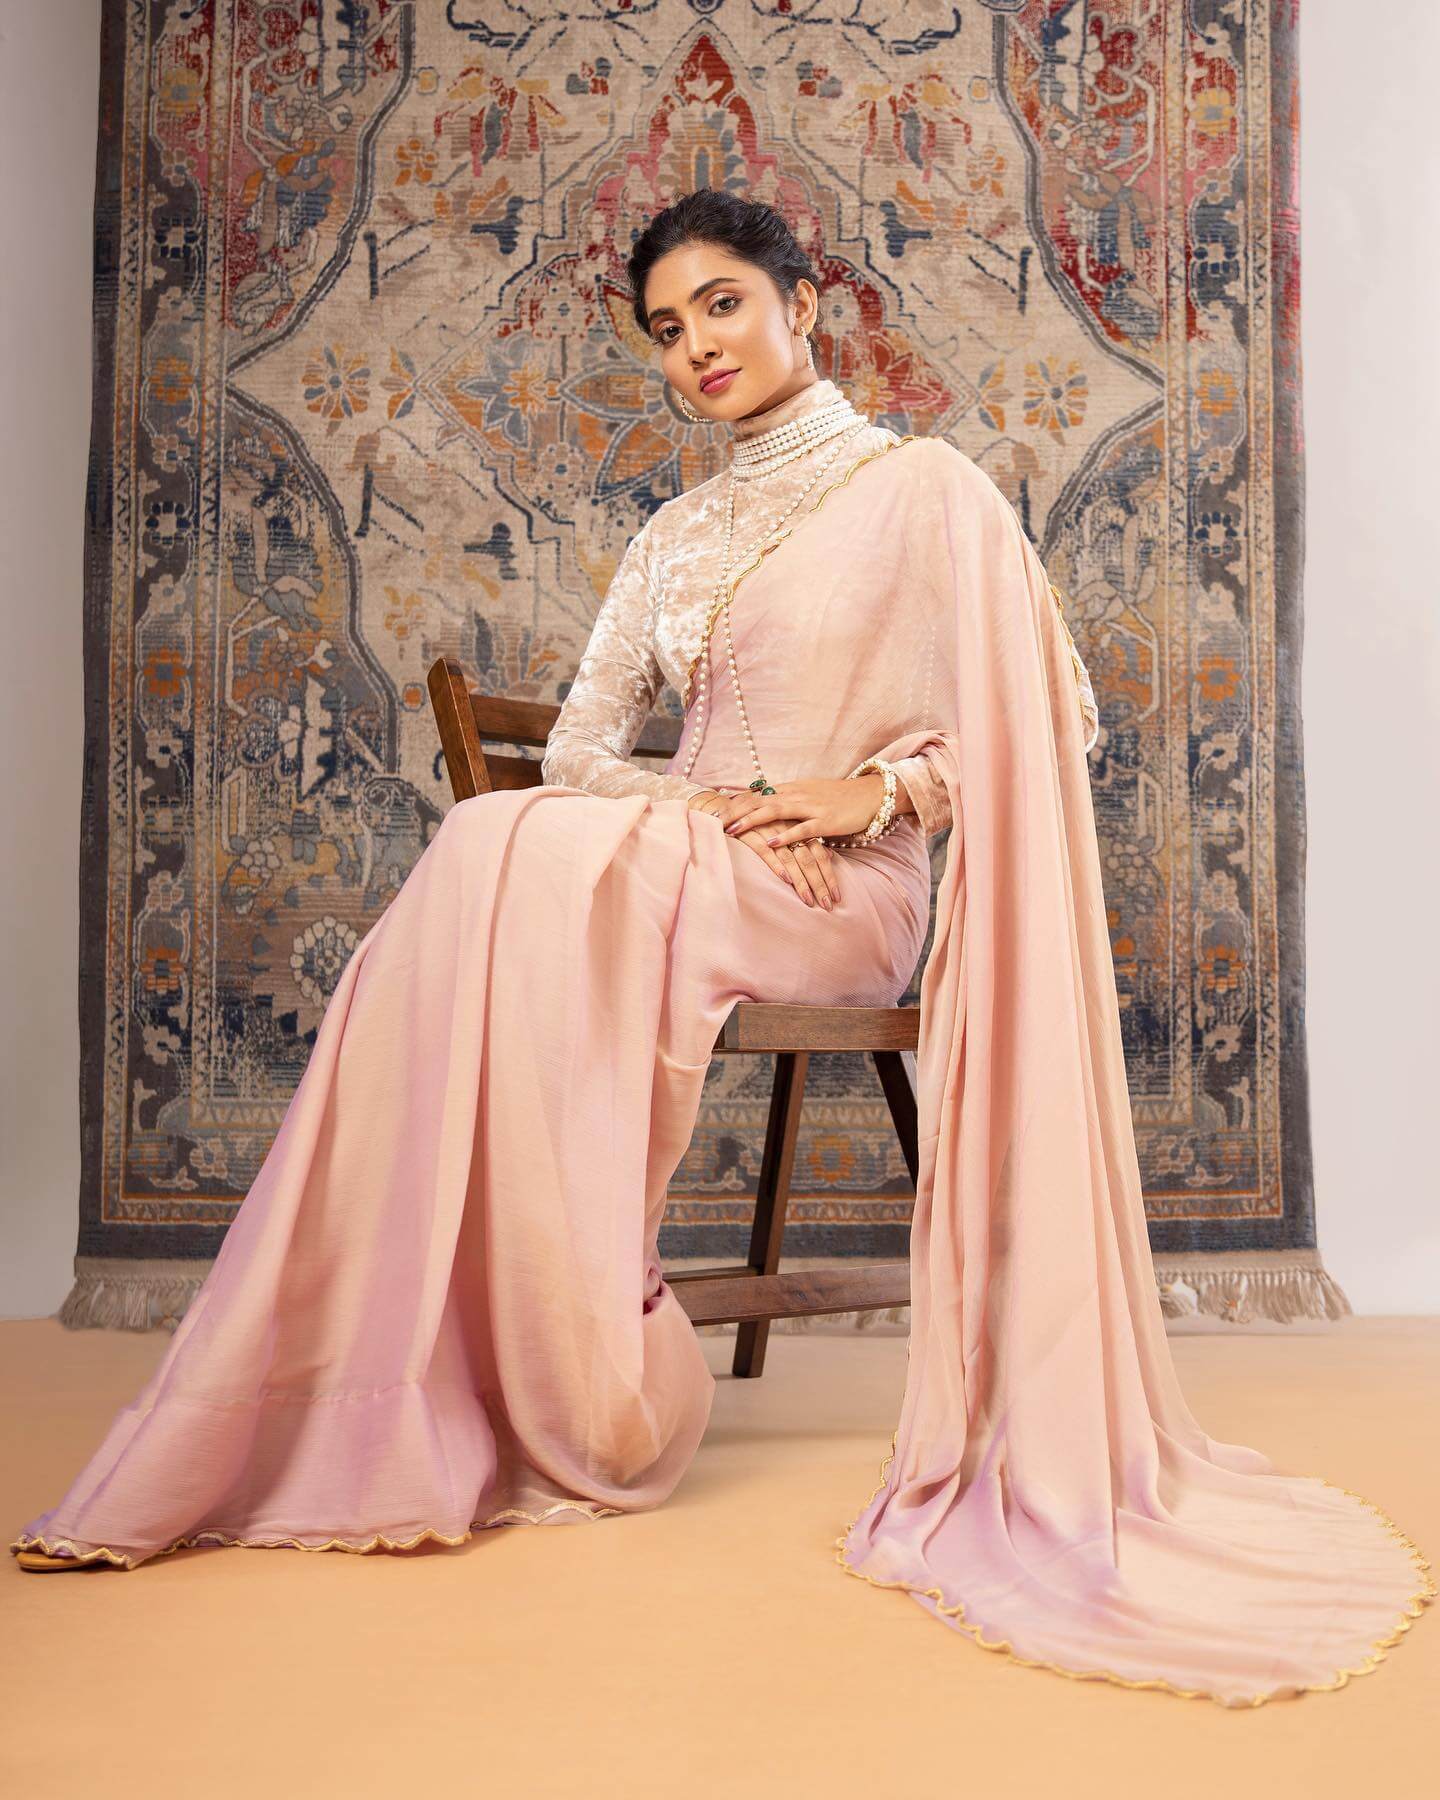 Swathi Muppala In Pastel Pink Solid Saree With Printed Full Neck Blouse Looks Elegant & Chic